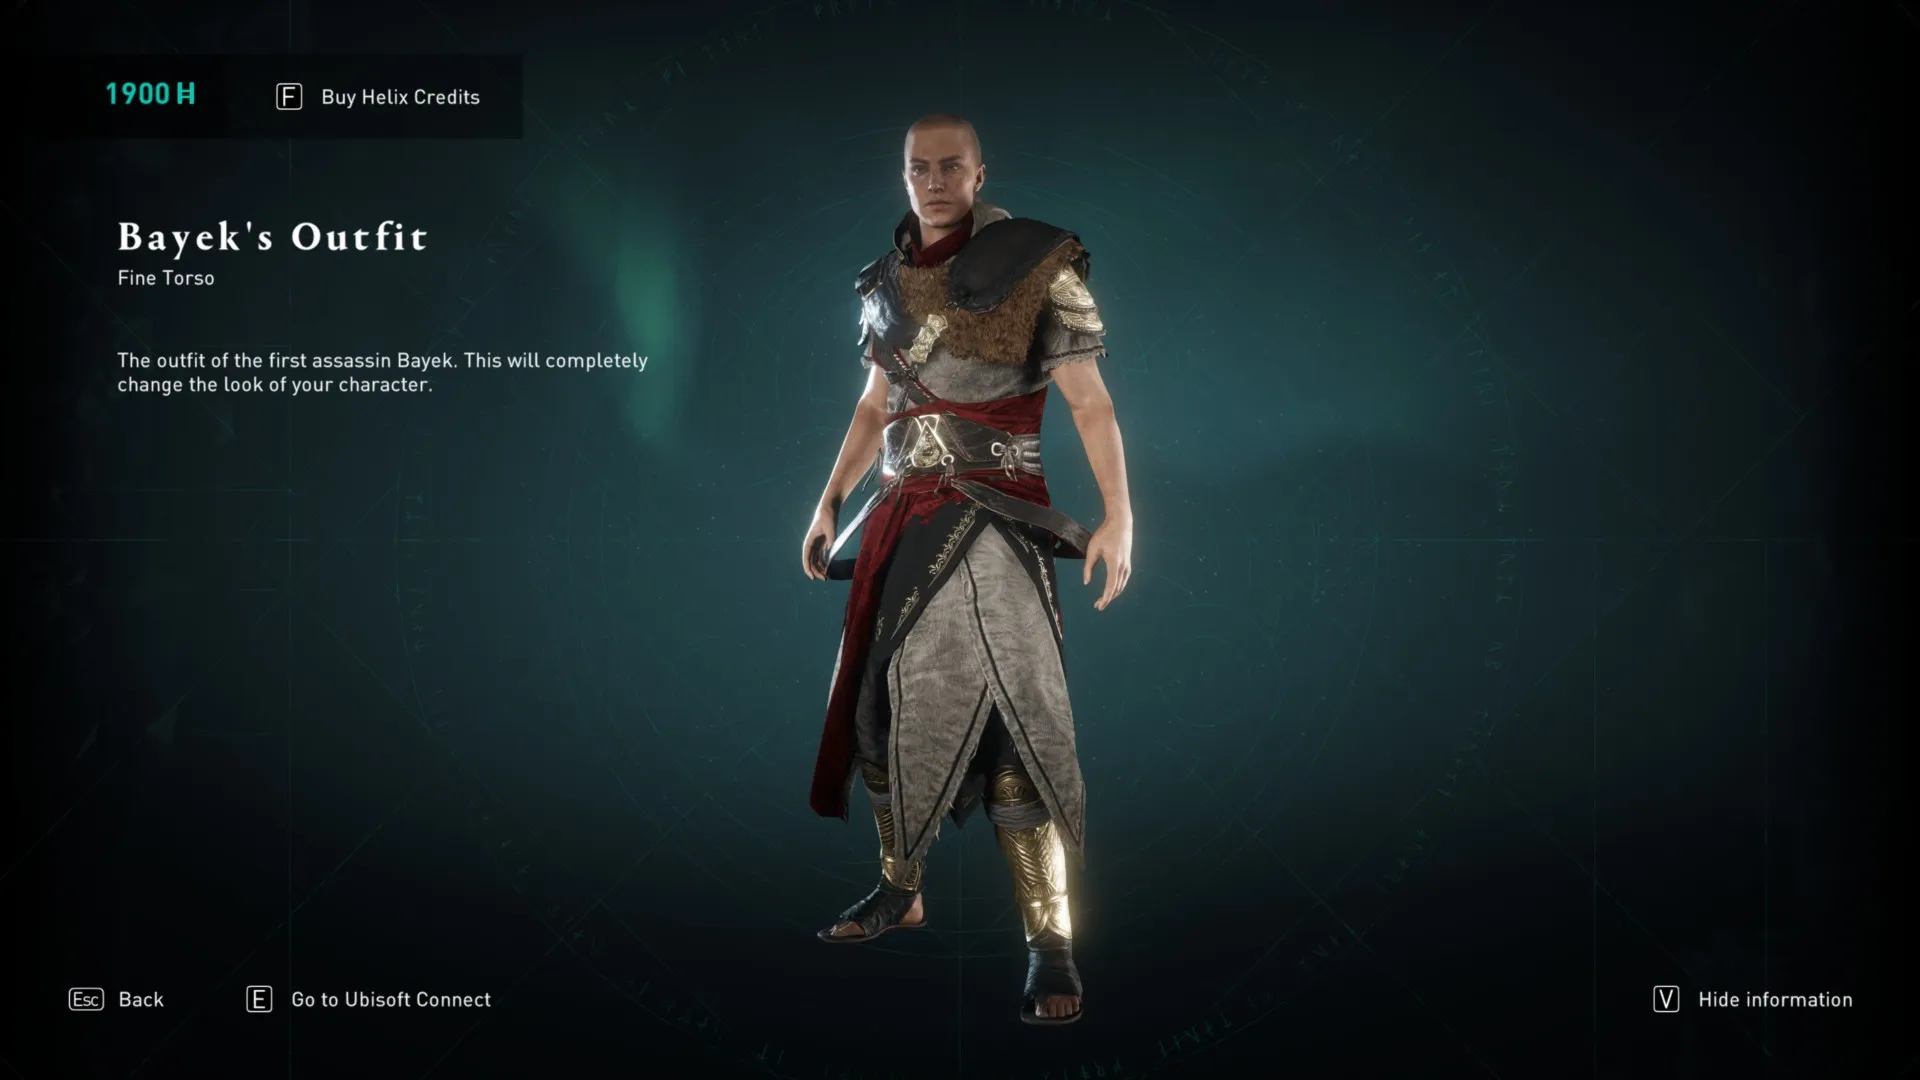 Sandy Discomfort Grind Assassin's Creed Valhalla: Are the microtransactions worth it?